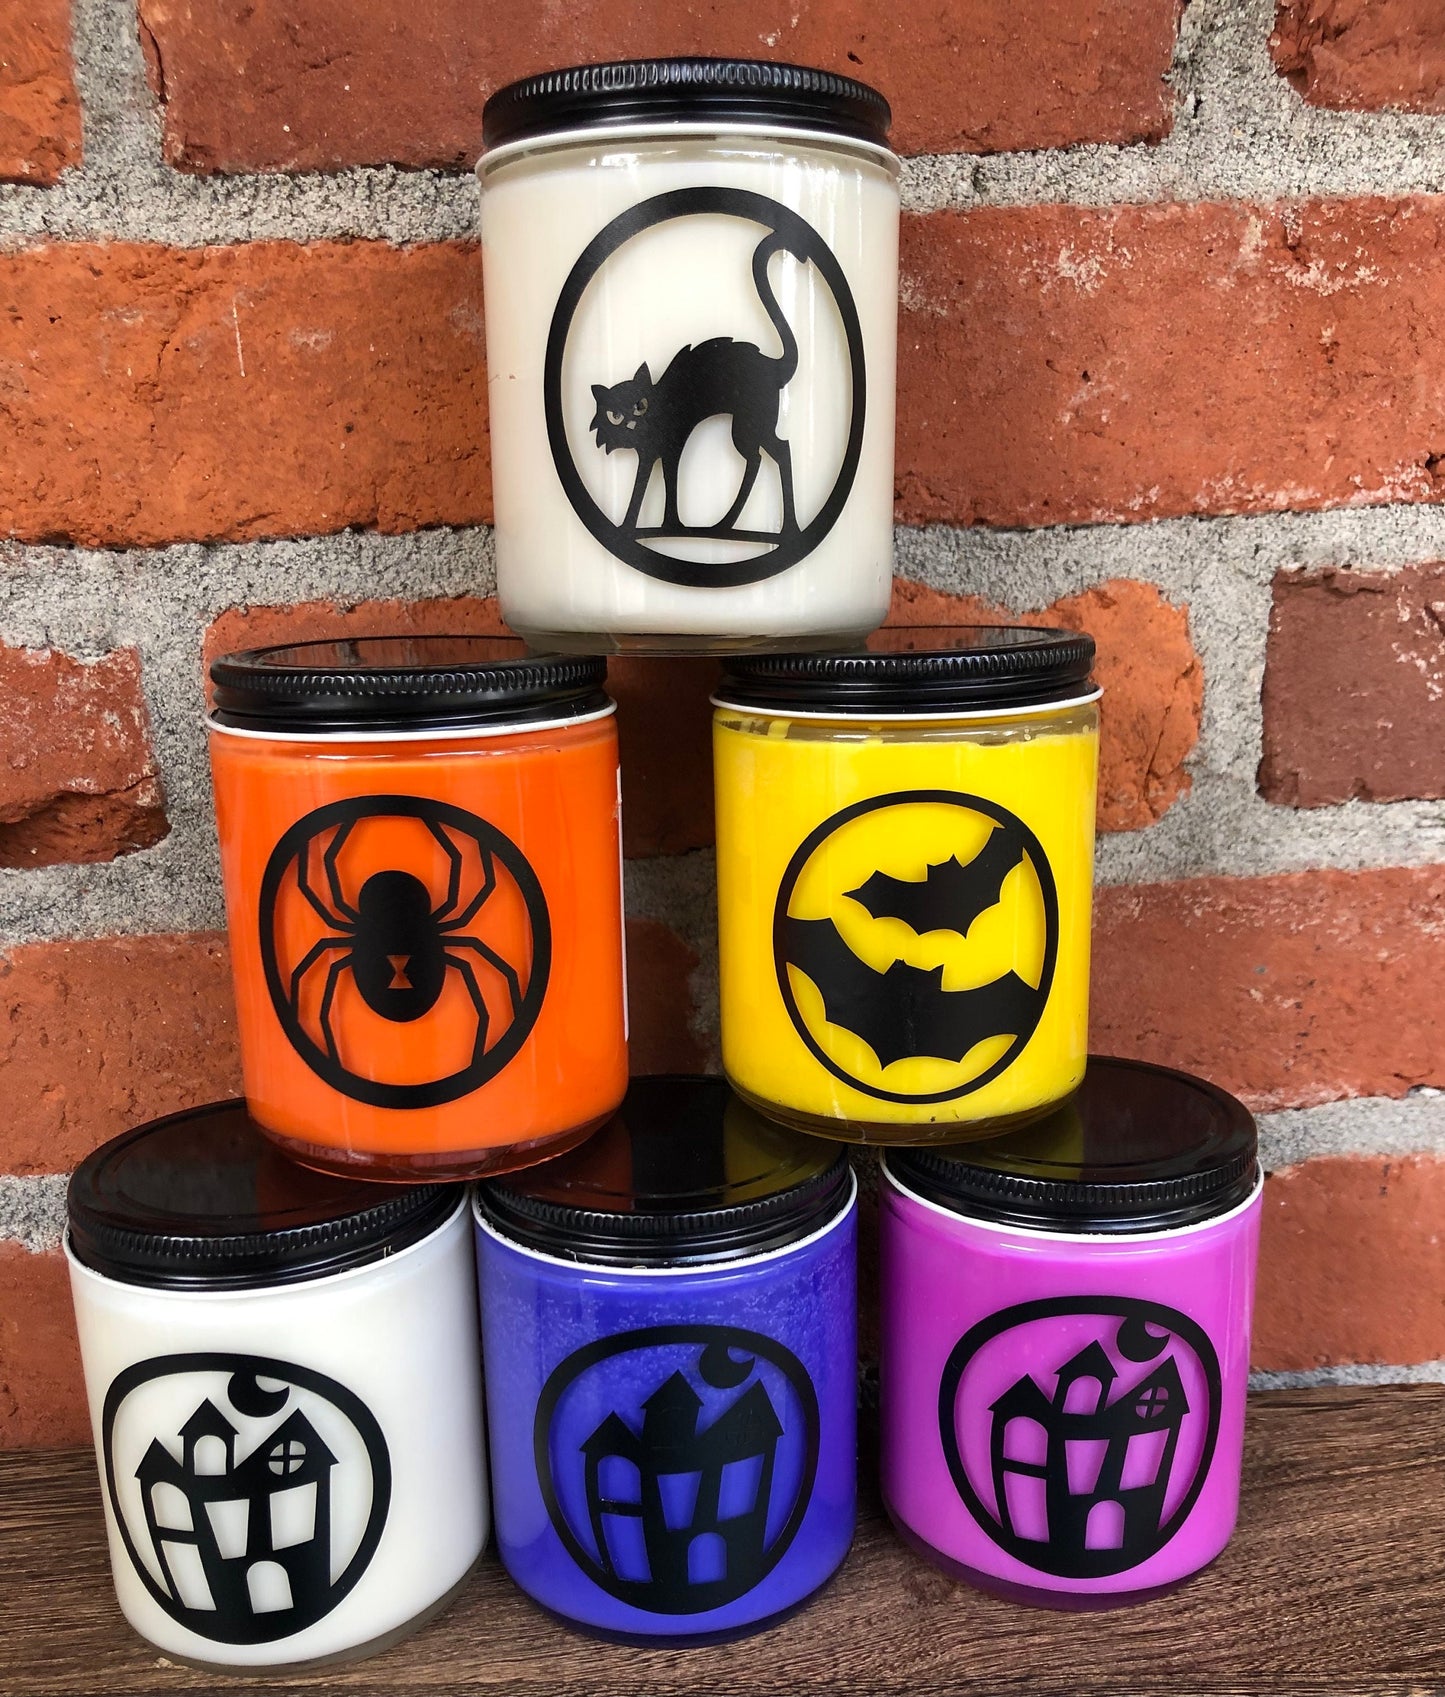 PDX Flower Power " Black Cat Halloween" Soy Candle